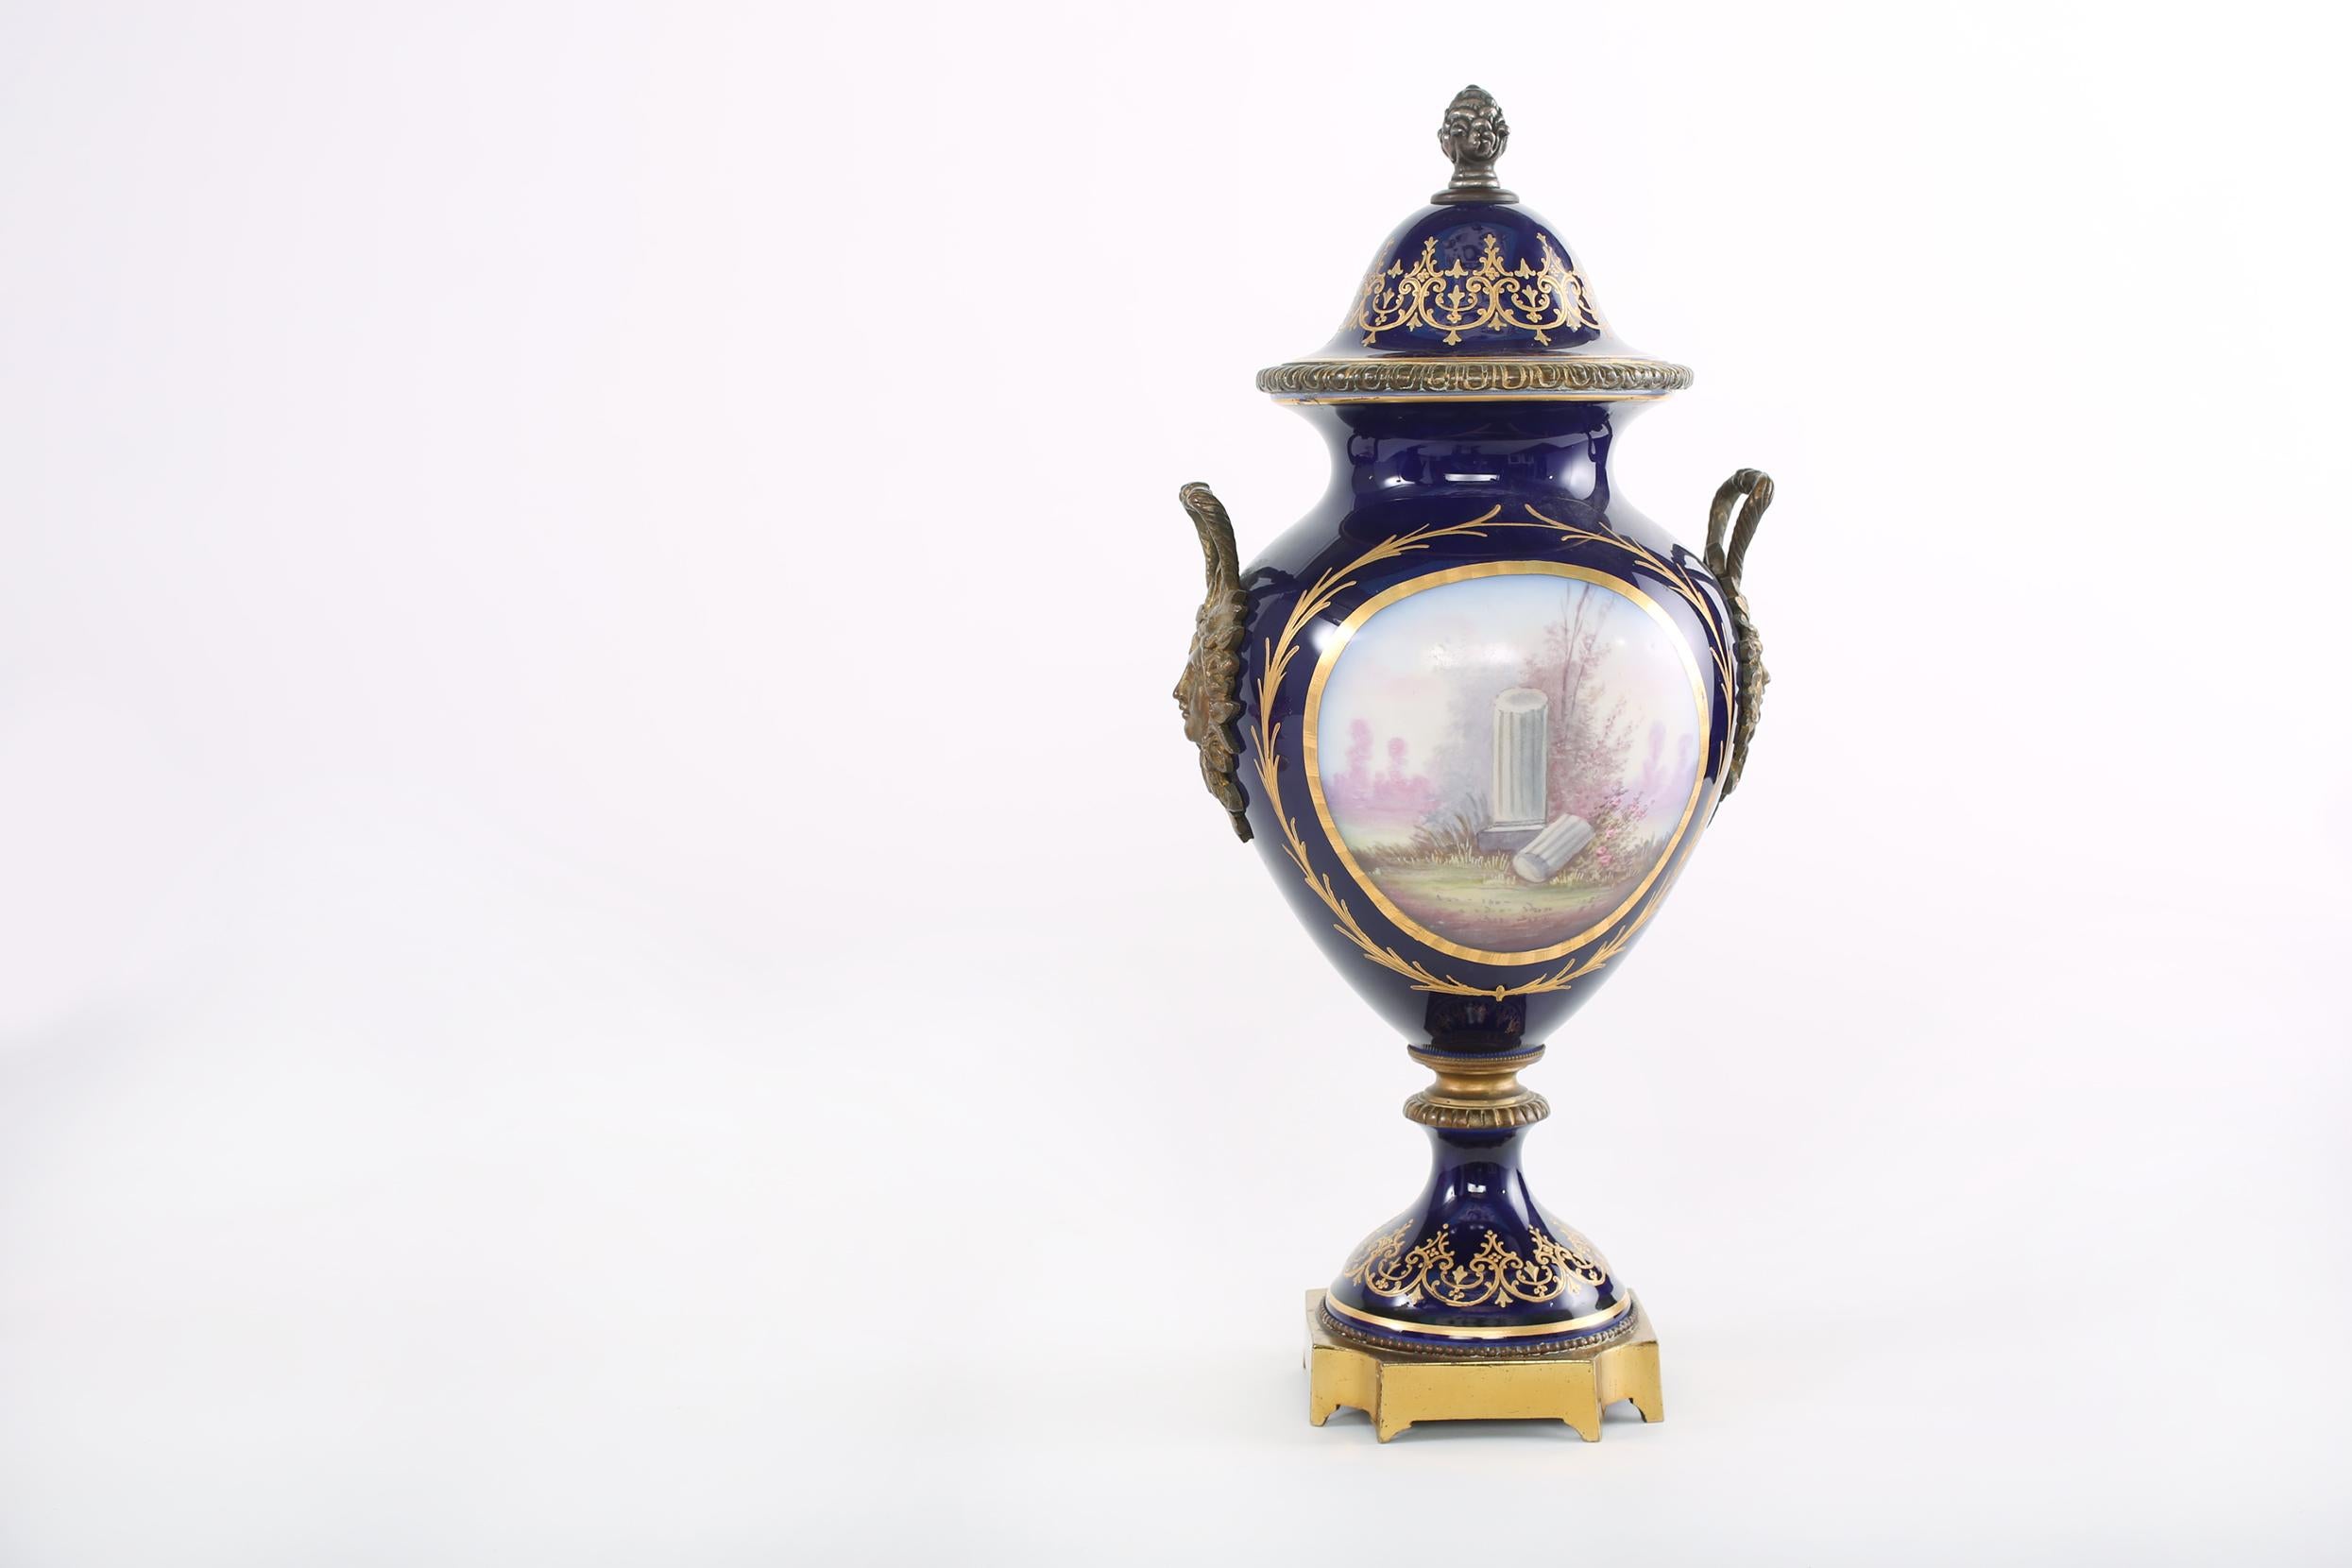 Bronze mounted / Sèvres Porcelain covered decorative urn with side handles & exterior painted scene design details. The urn is in good antique condition. Minor wear appropriate with age / use. Covered with repaired hair line. The urn stand about 18